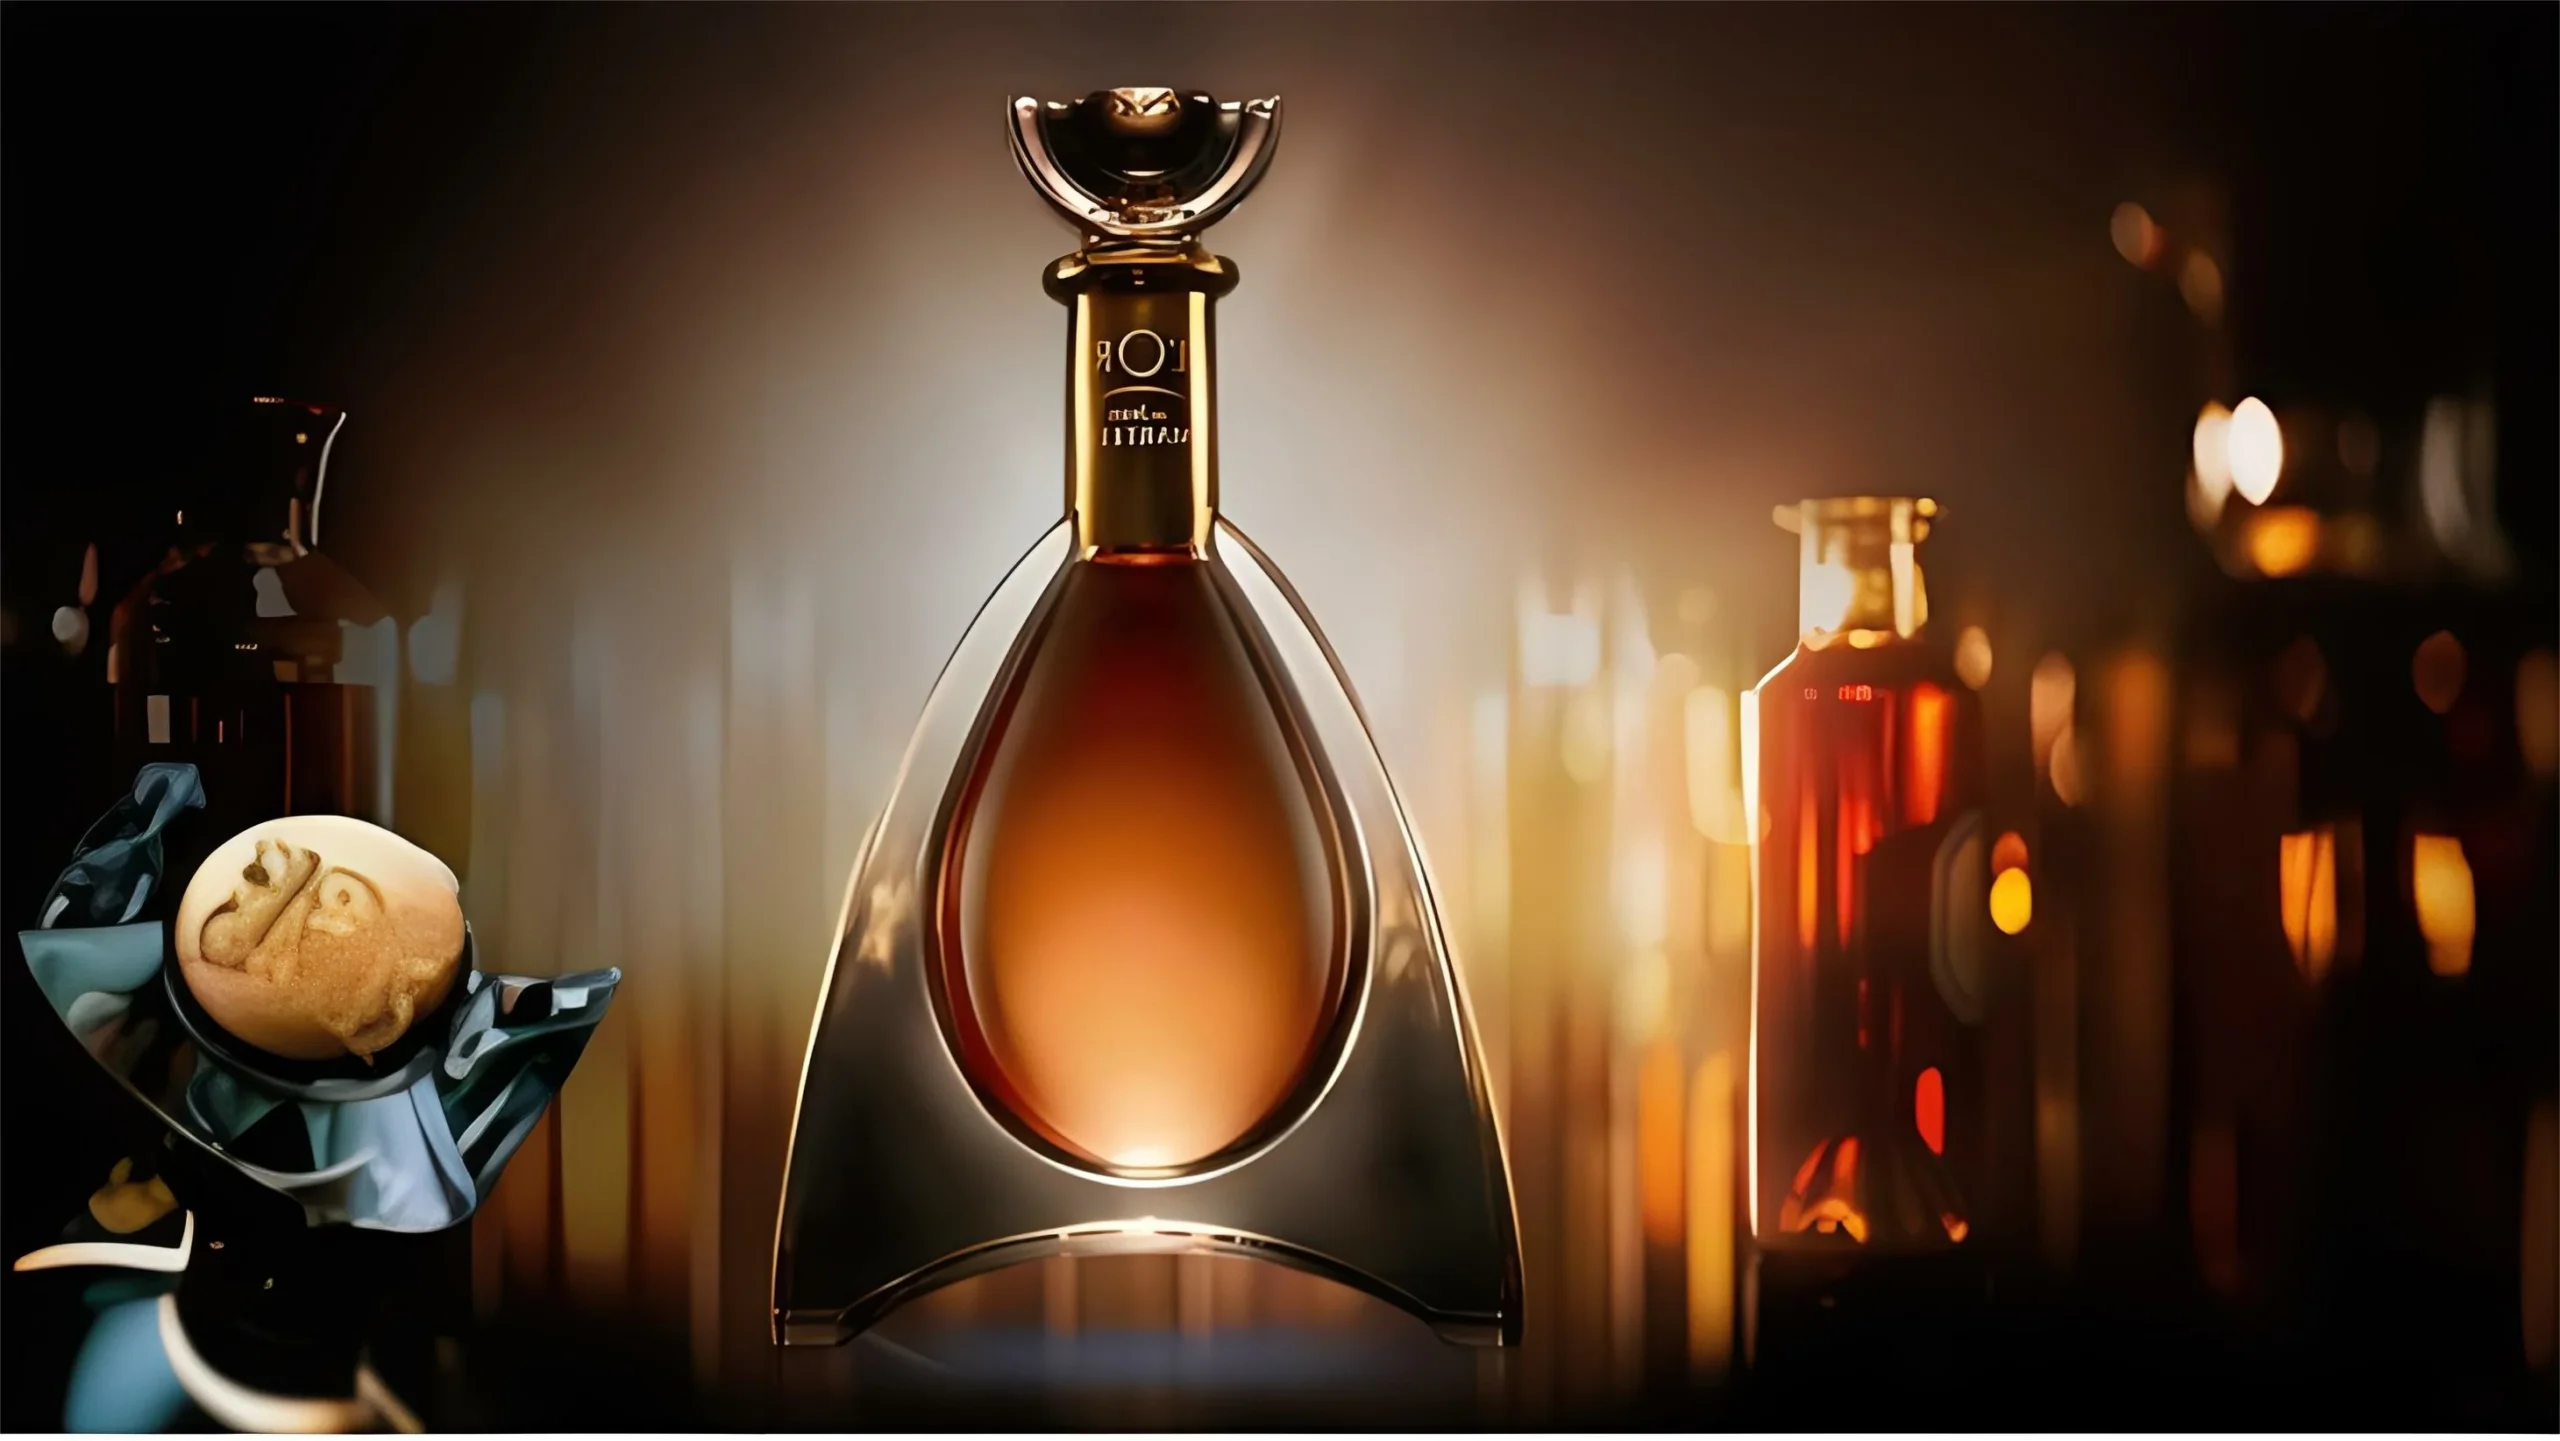 Rare and limited edition bottles become works of art, with designs by renowned artists adding to their value.